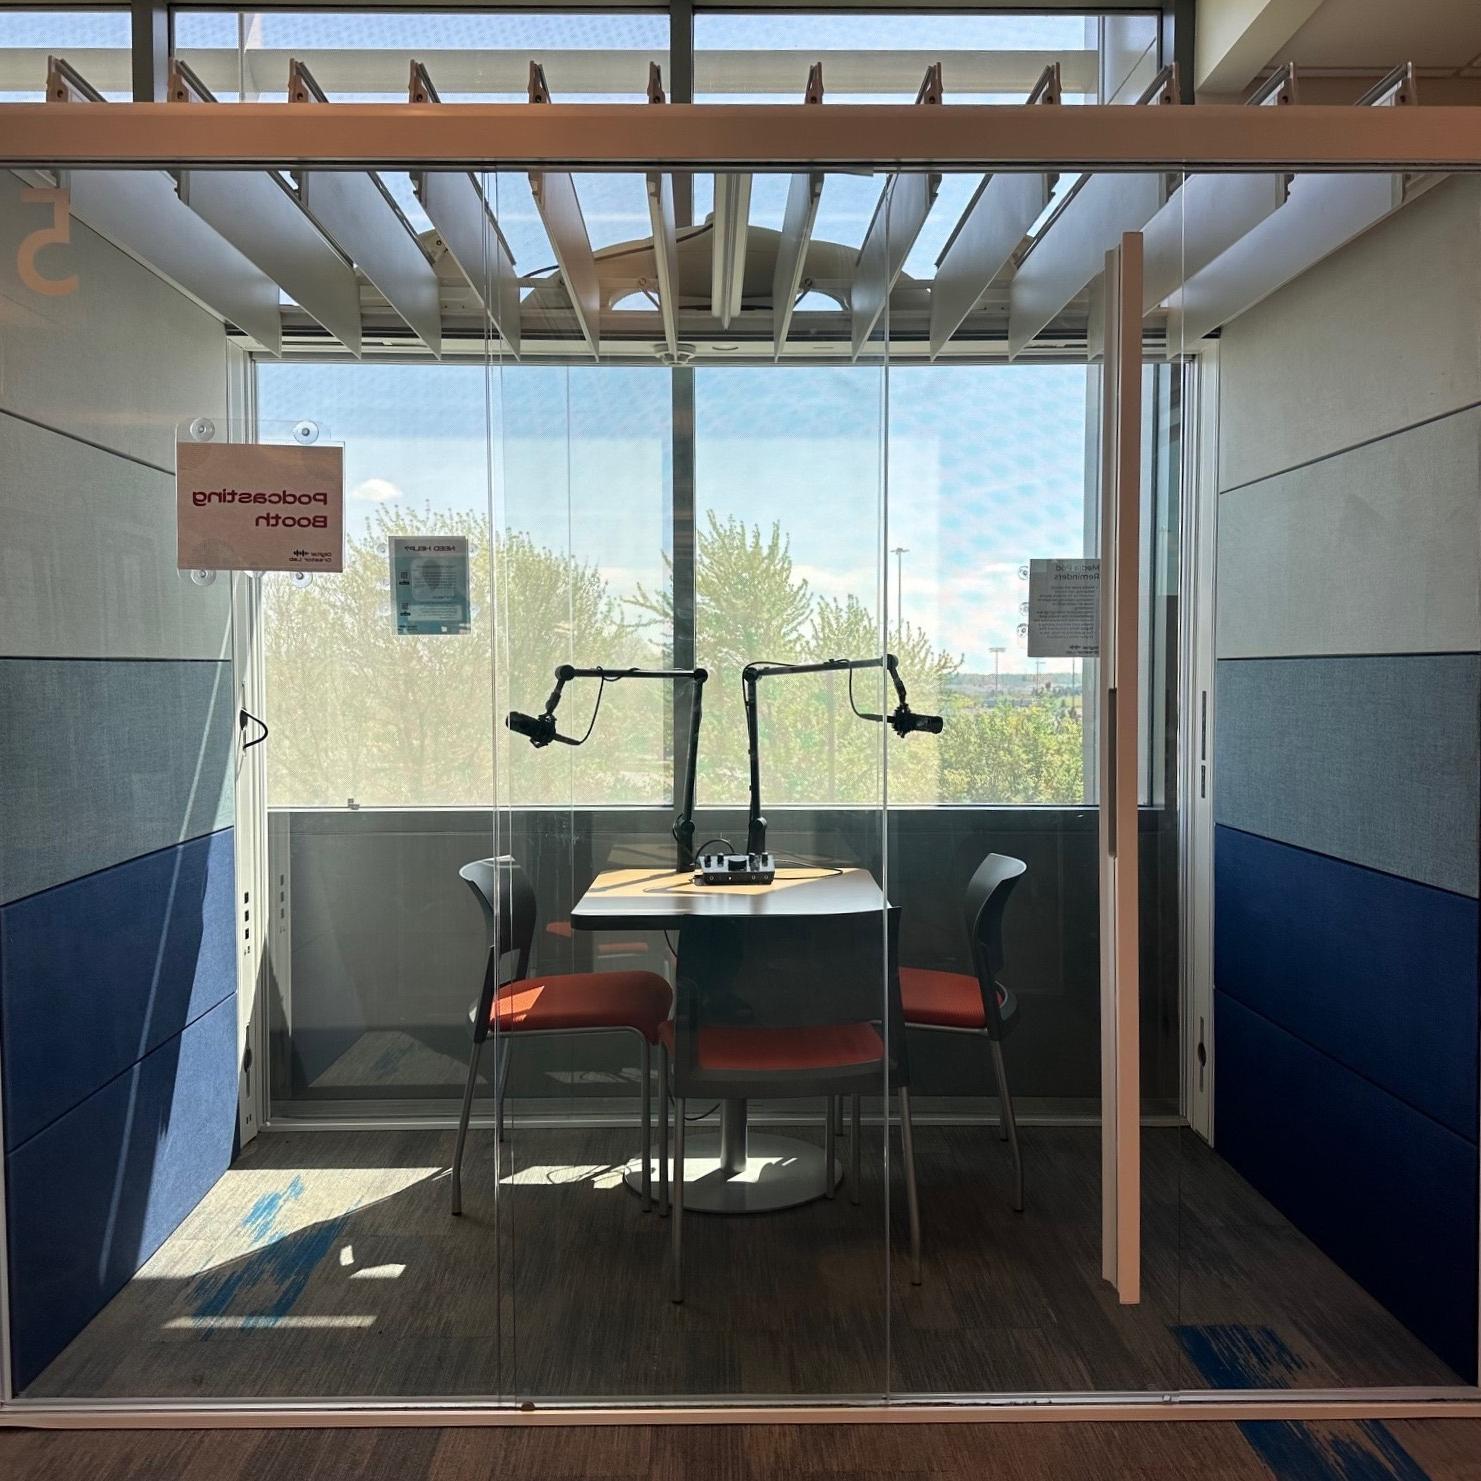 Group Study Pod with table and chairs